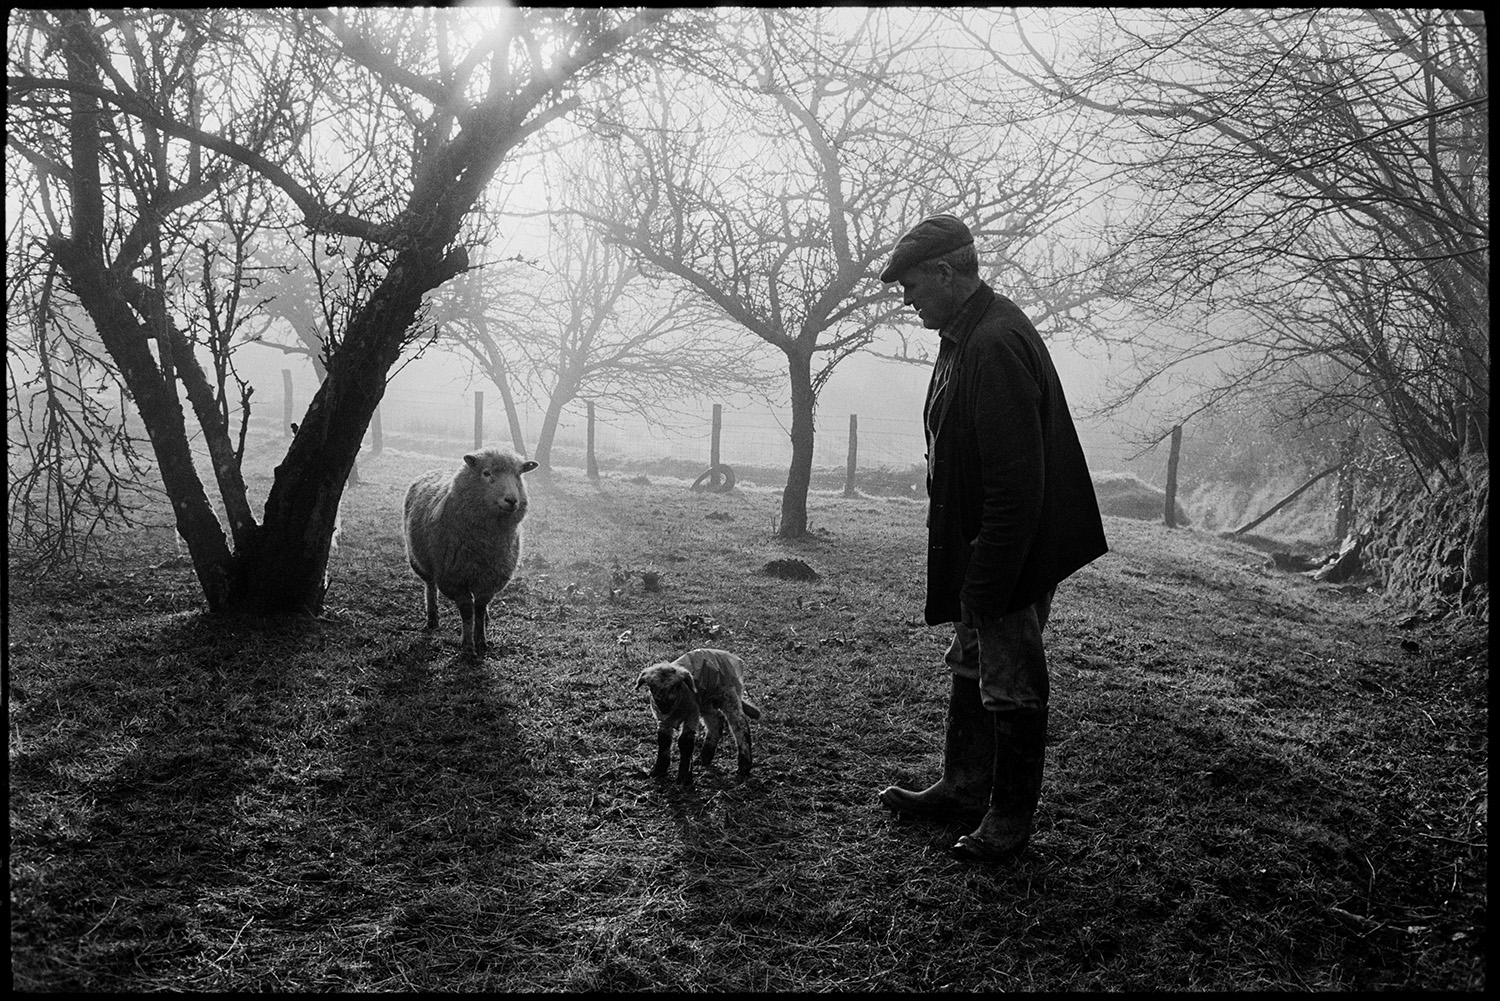 Sheep in orchard, farmyard and bottle feeding lamb in barn.
[Alf Pugsley in an orchard with a ewe and a lamb at Lower Langham, Dolton. Apple trees shrouded in mist are visible in the background.]